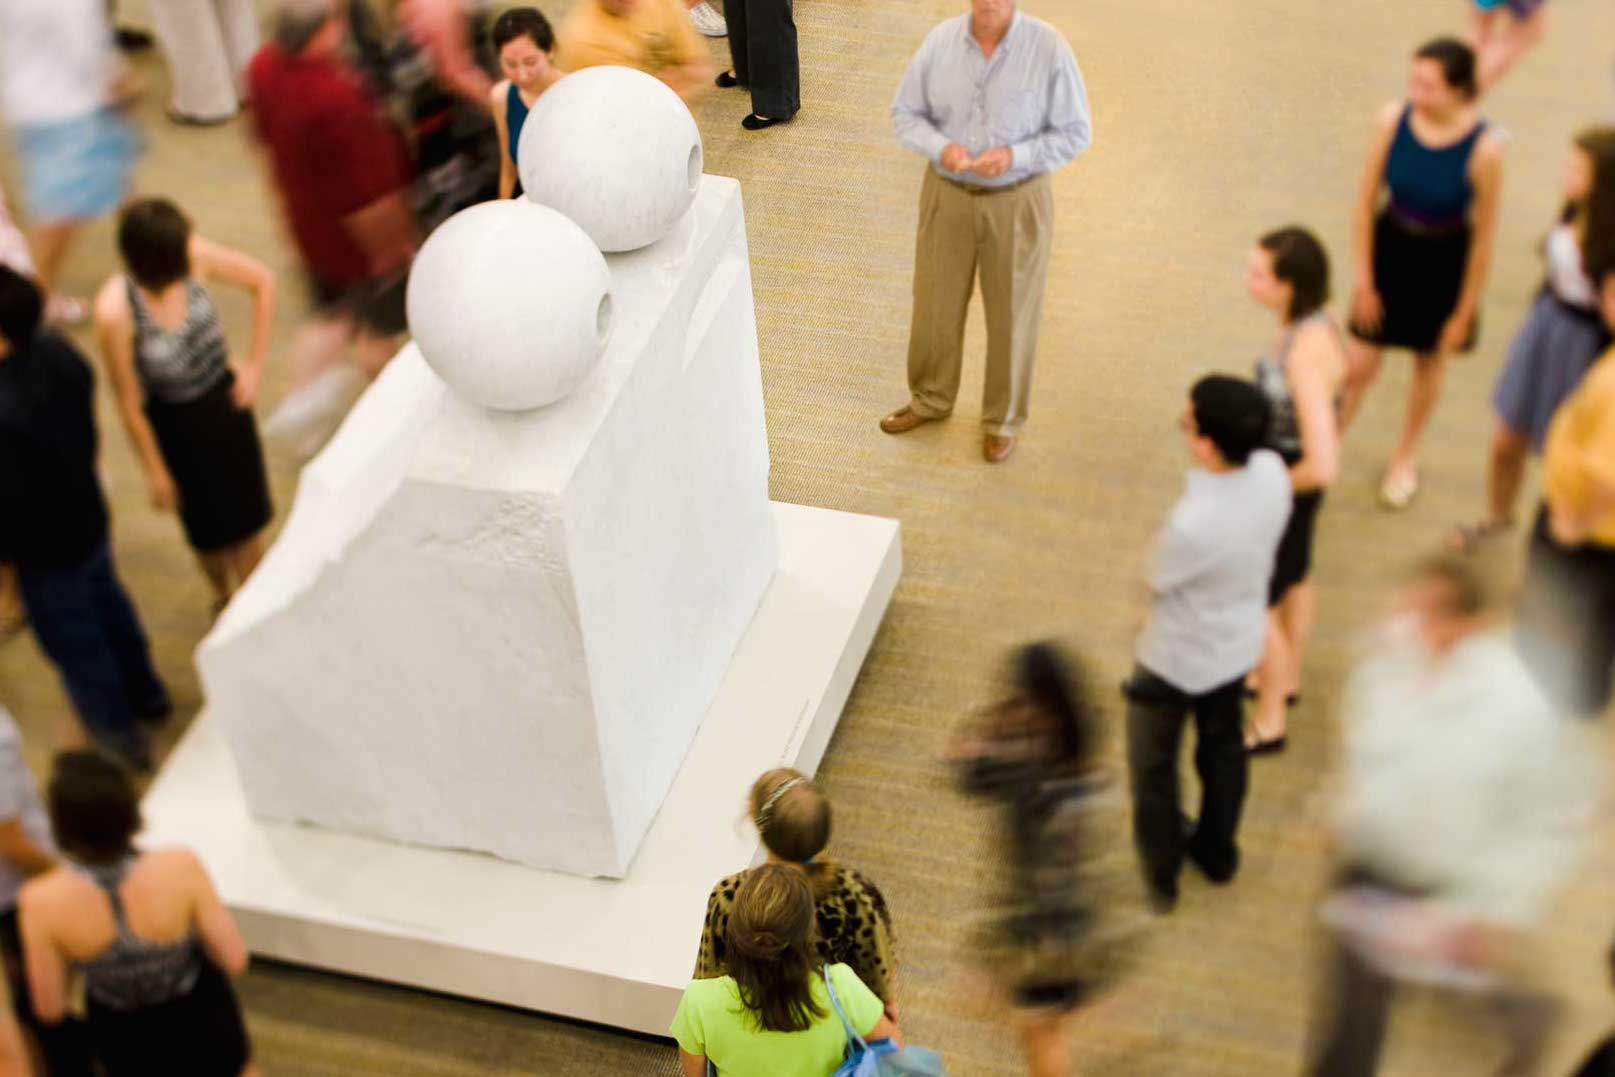 A large white marble sculpture in a room surrounded by people.